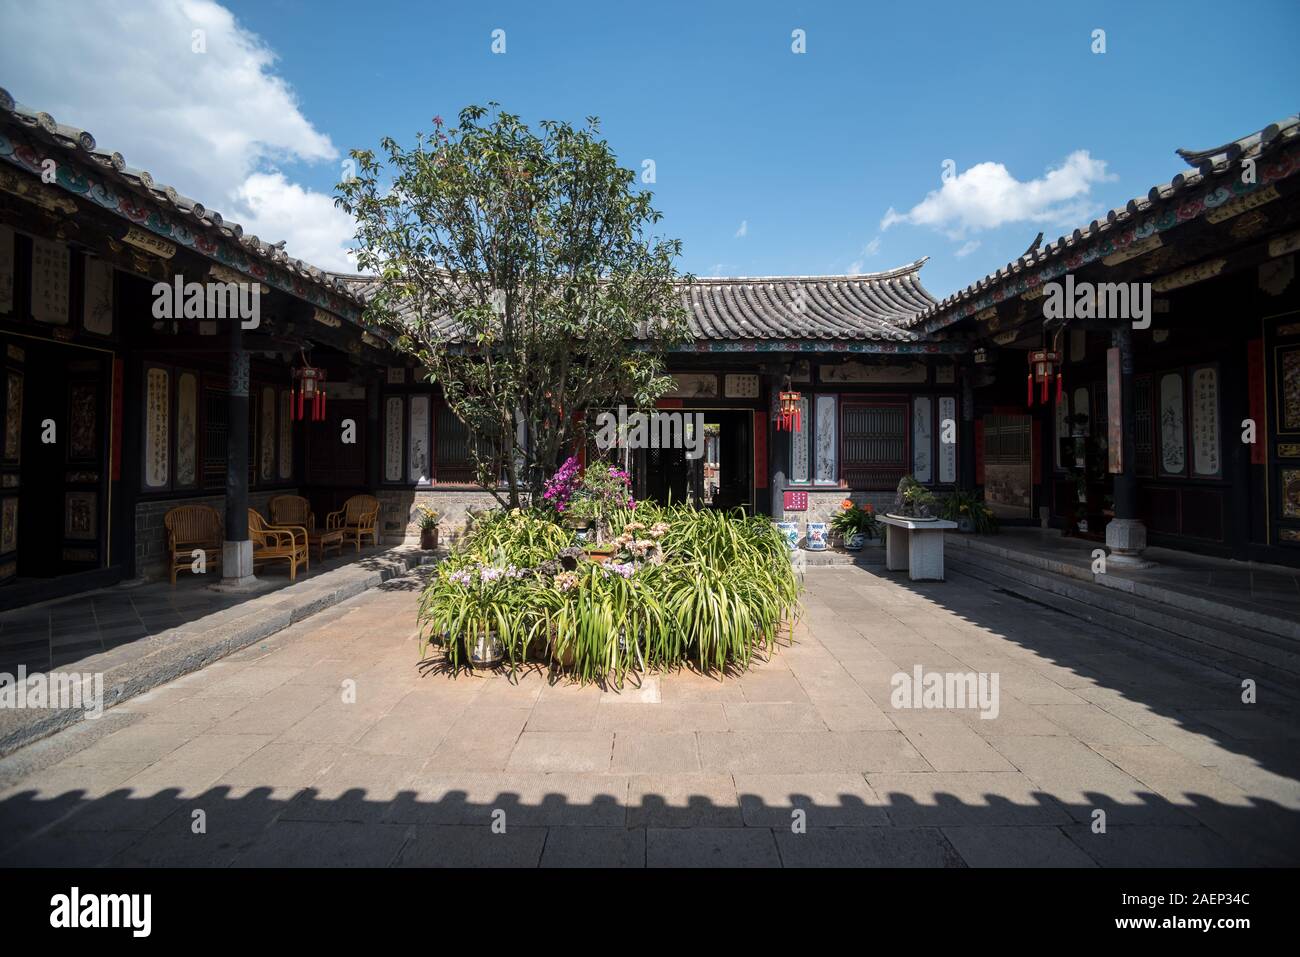 March 7, 2019: Garden in a historic building at the Chinese city of Jianshui, Yunnan, China Stock Photo